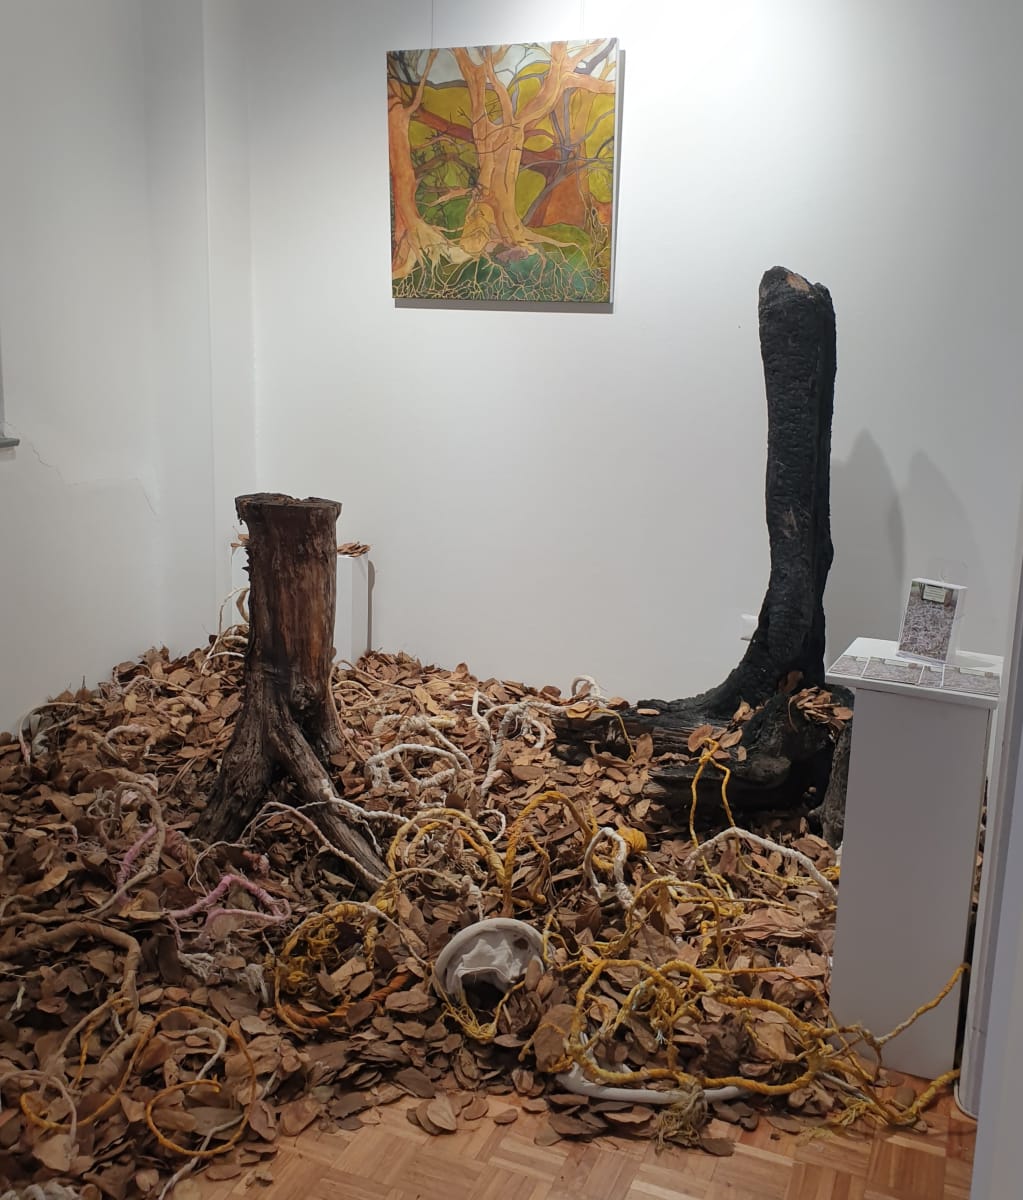 Beneath Our Feet, Second Version by Kit Hoisington  Image: Installation in Chrissie Cotter Gallery, a small room to itself, open to incoming visitors.